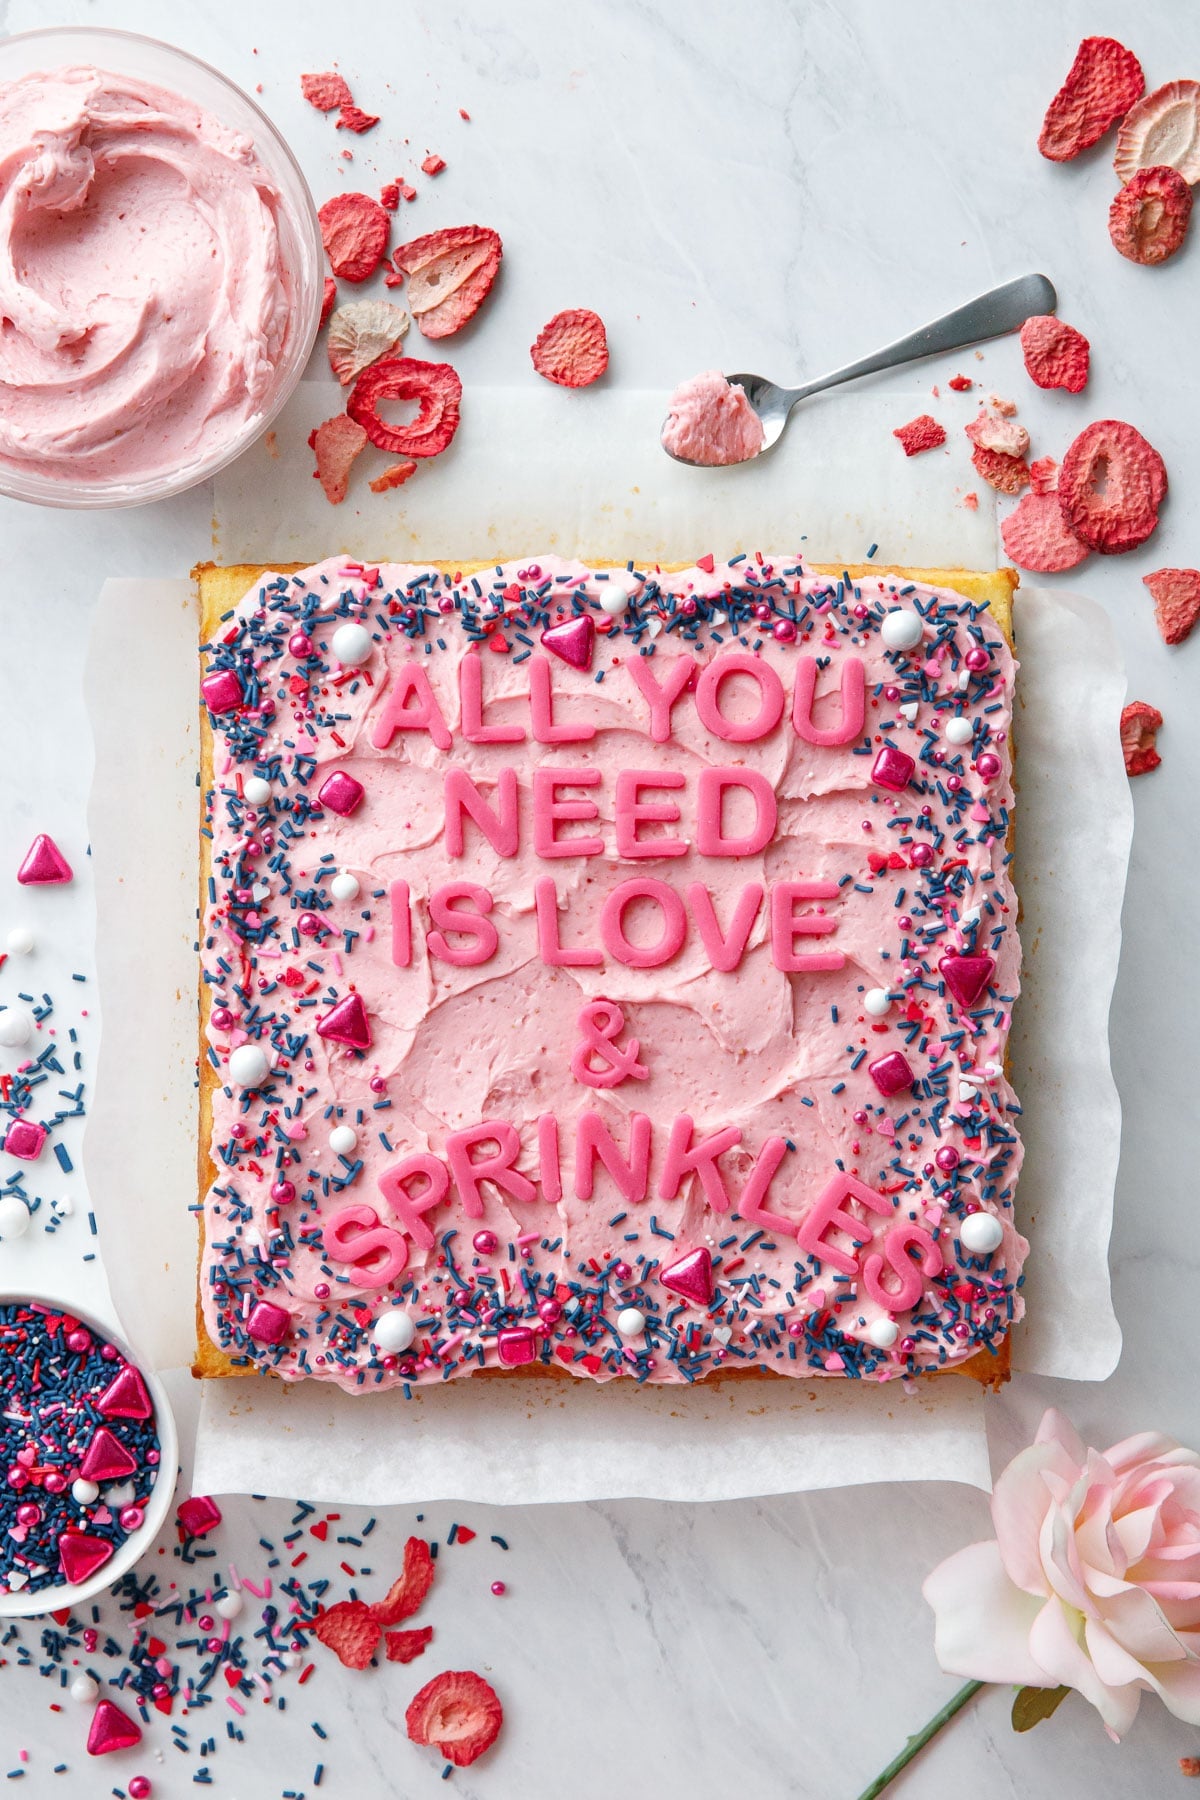 Order Pink Heart Valentine's Day cake | Gurgaon Bakers